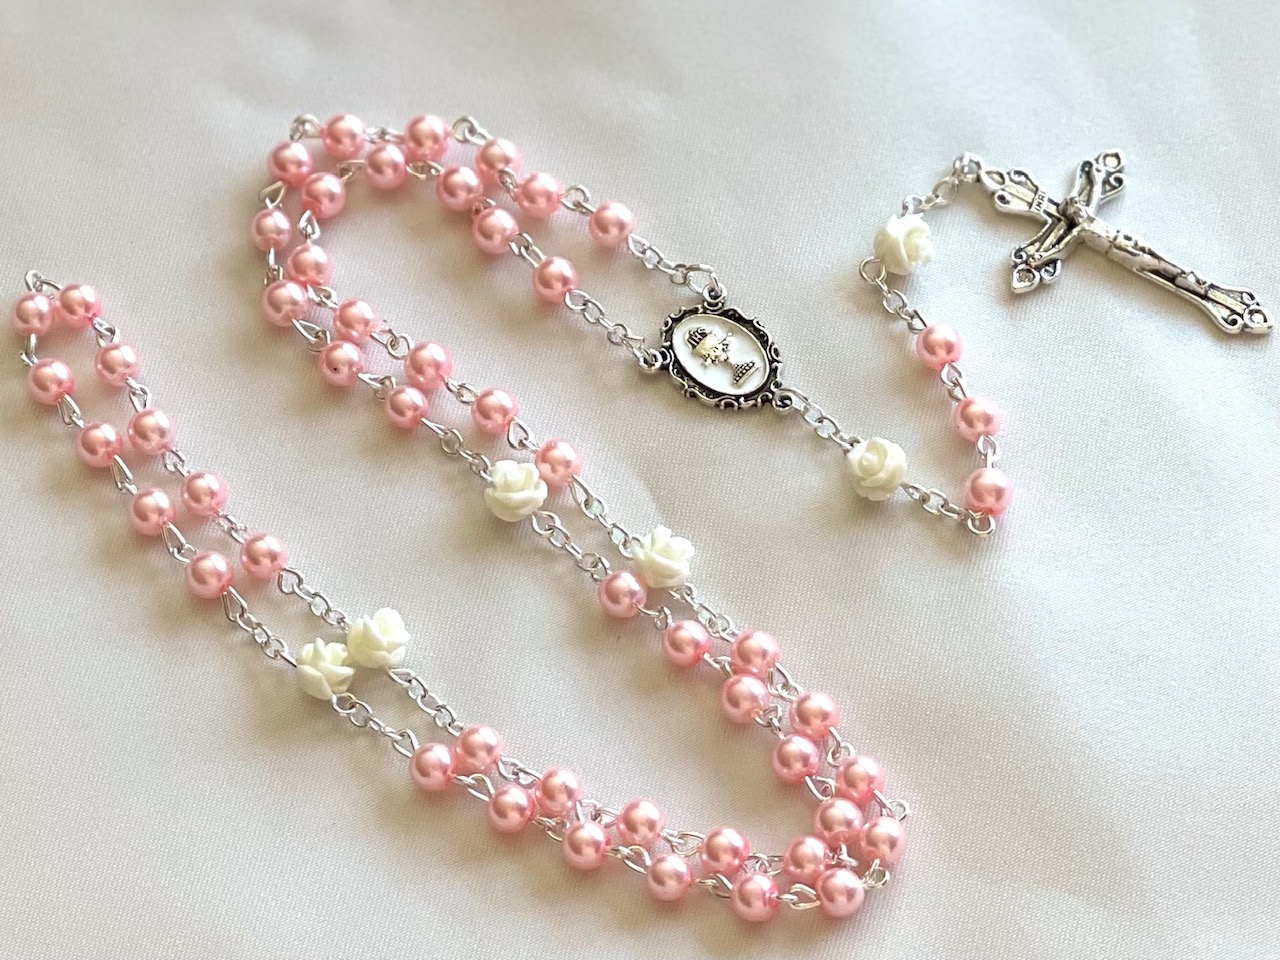 Pink pearl beads w/white flower rosary